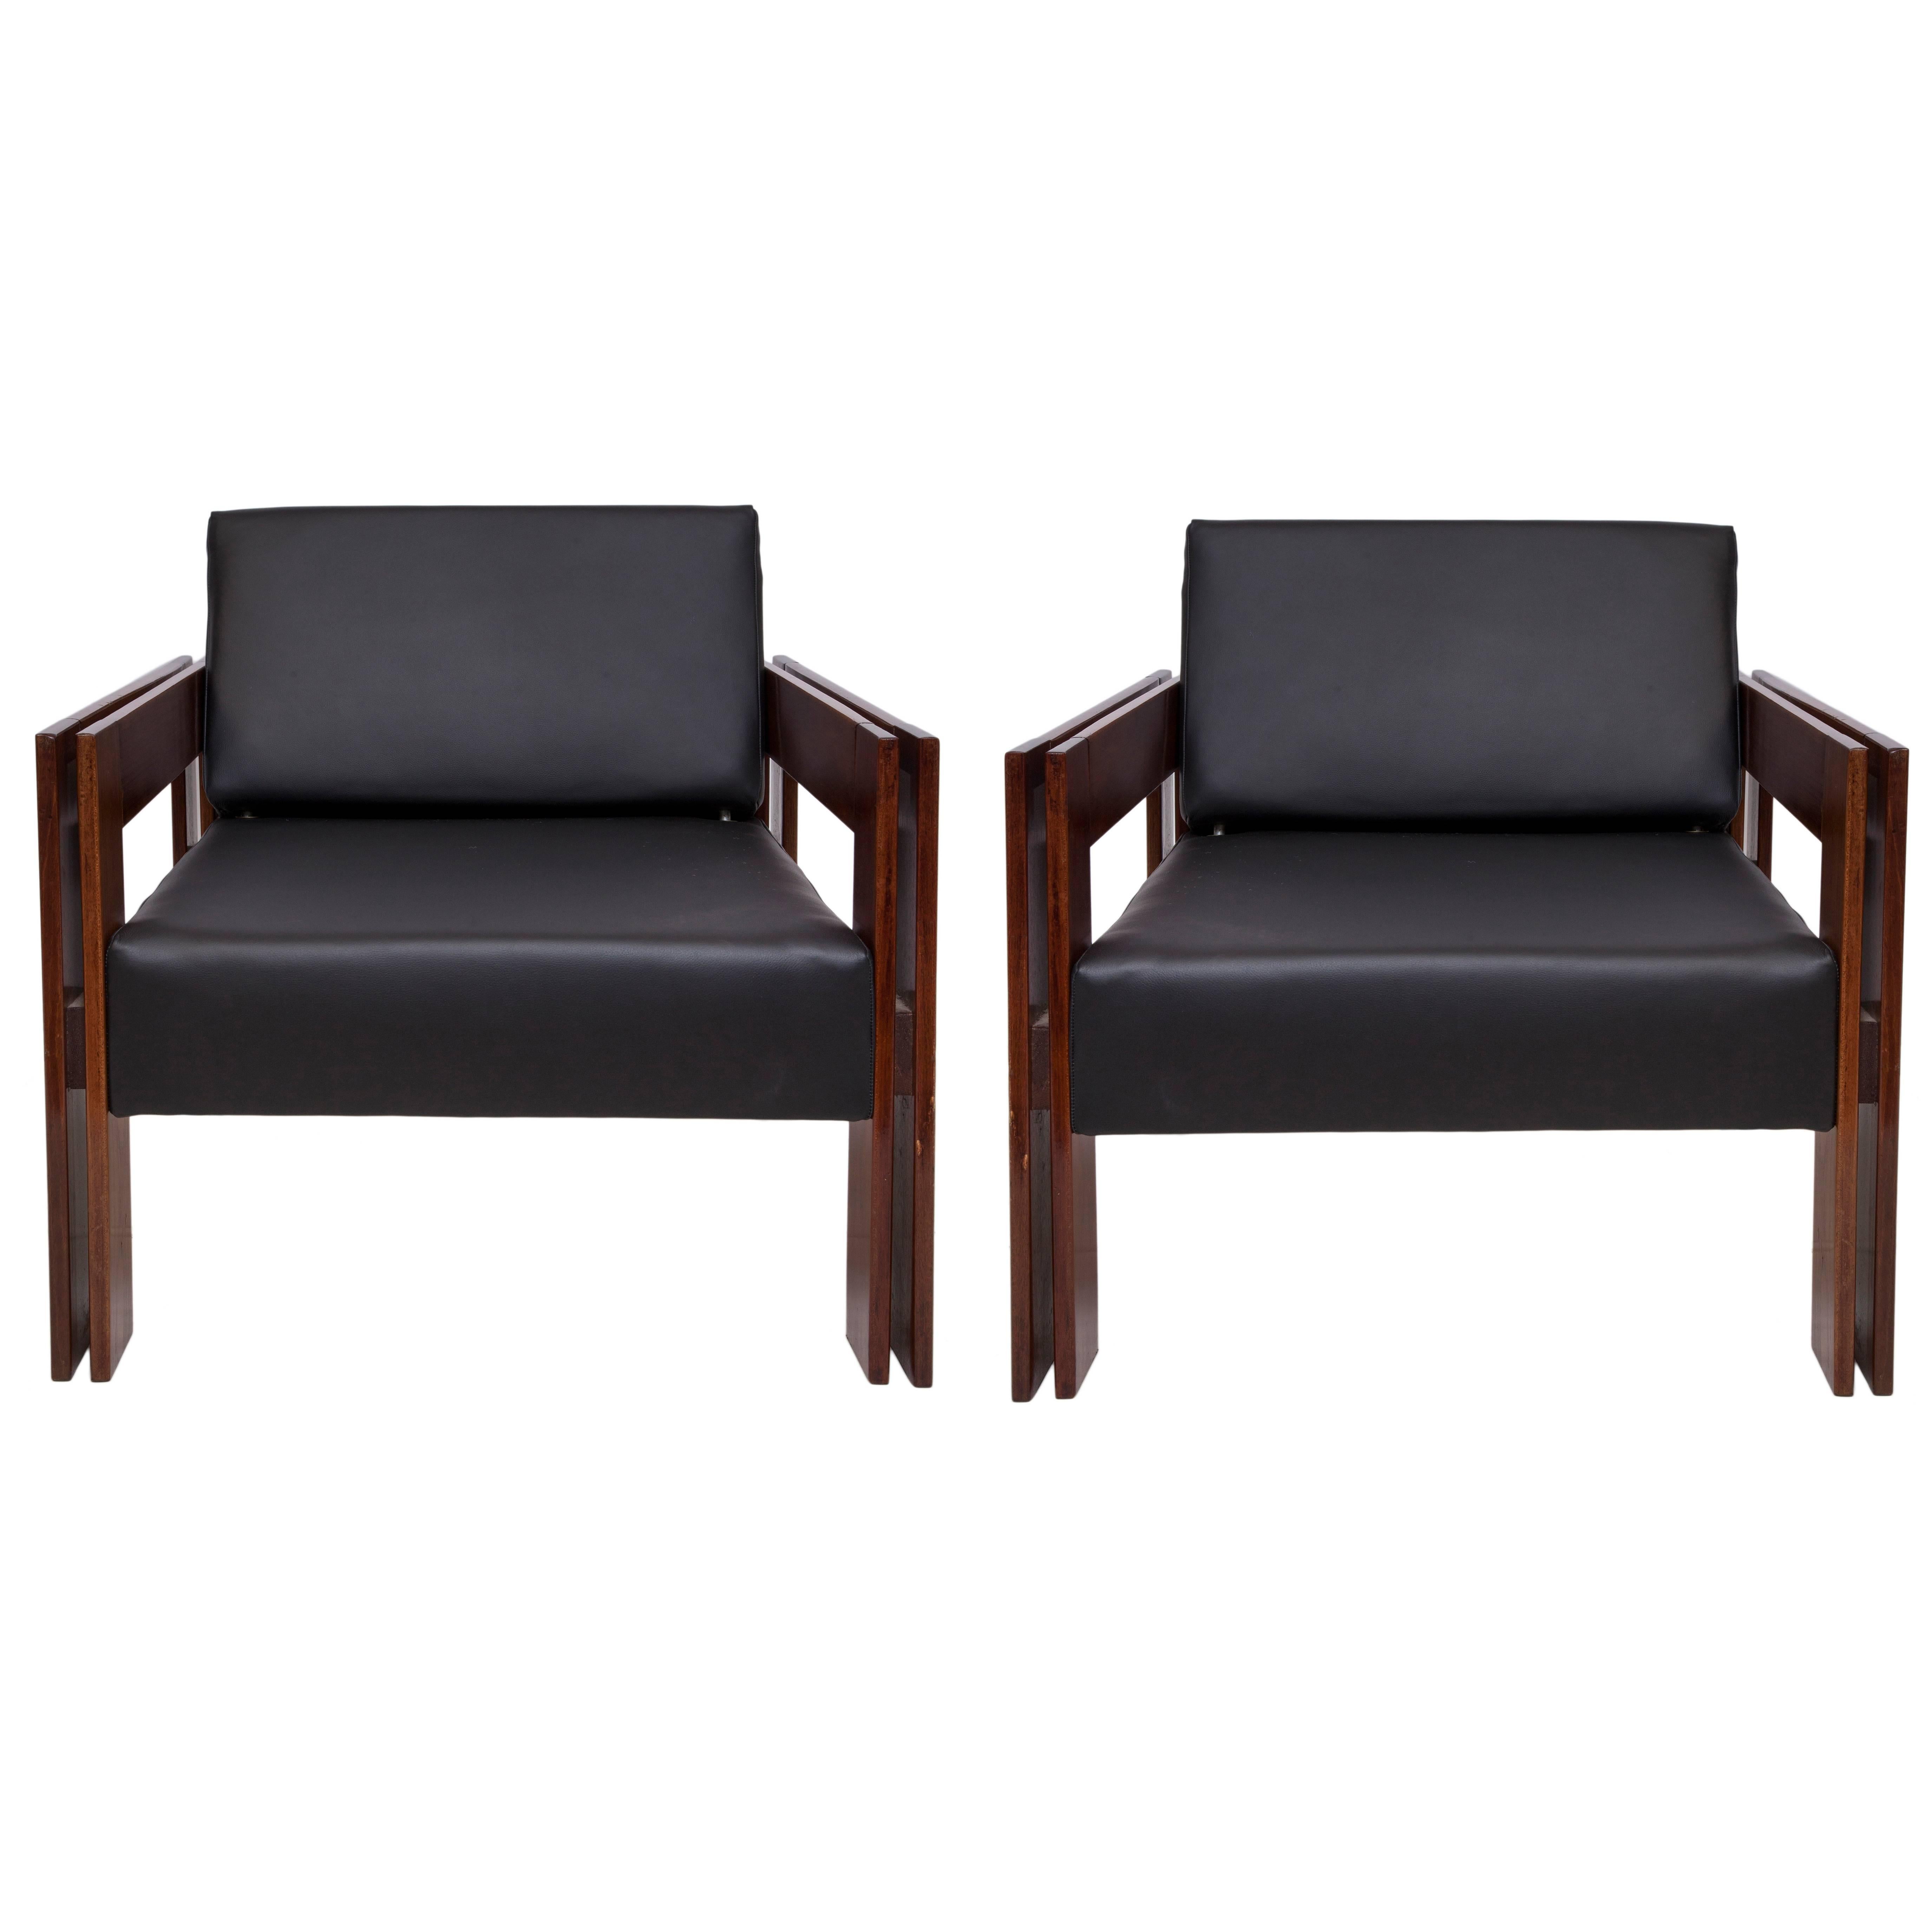 A pair of vintage circa 1960s armchairs by designer Percival Lafer, framed in Brazilian jacaranda wood, with seats and backs upholstered in black leather, which, when adjusted, can double as chaise lounges. Very good condition, consistent with age